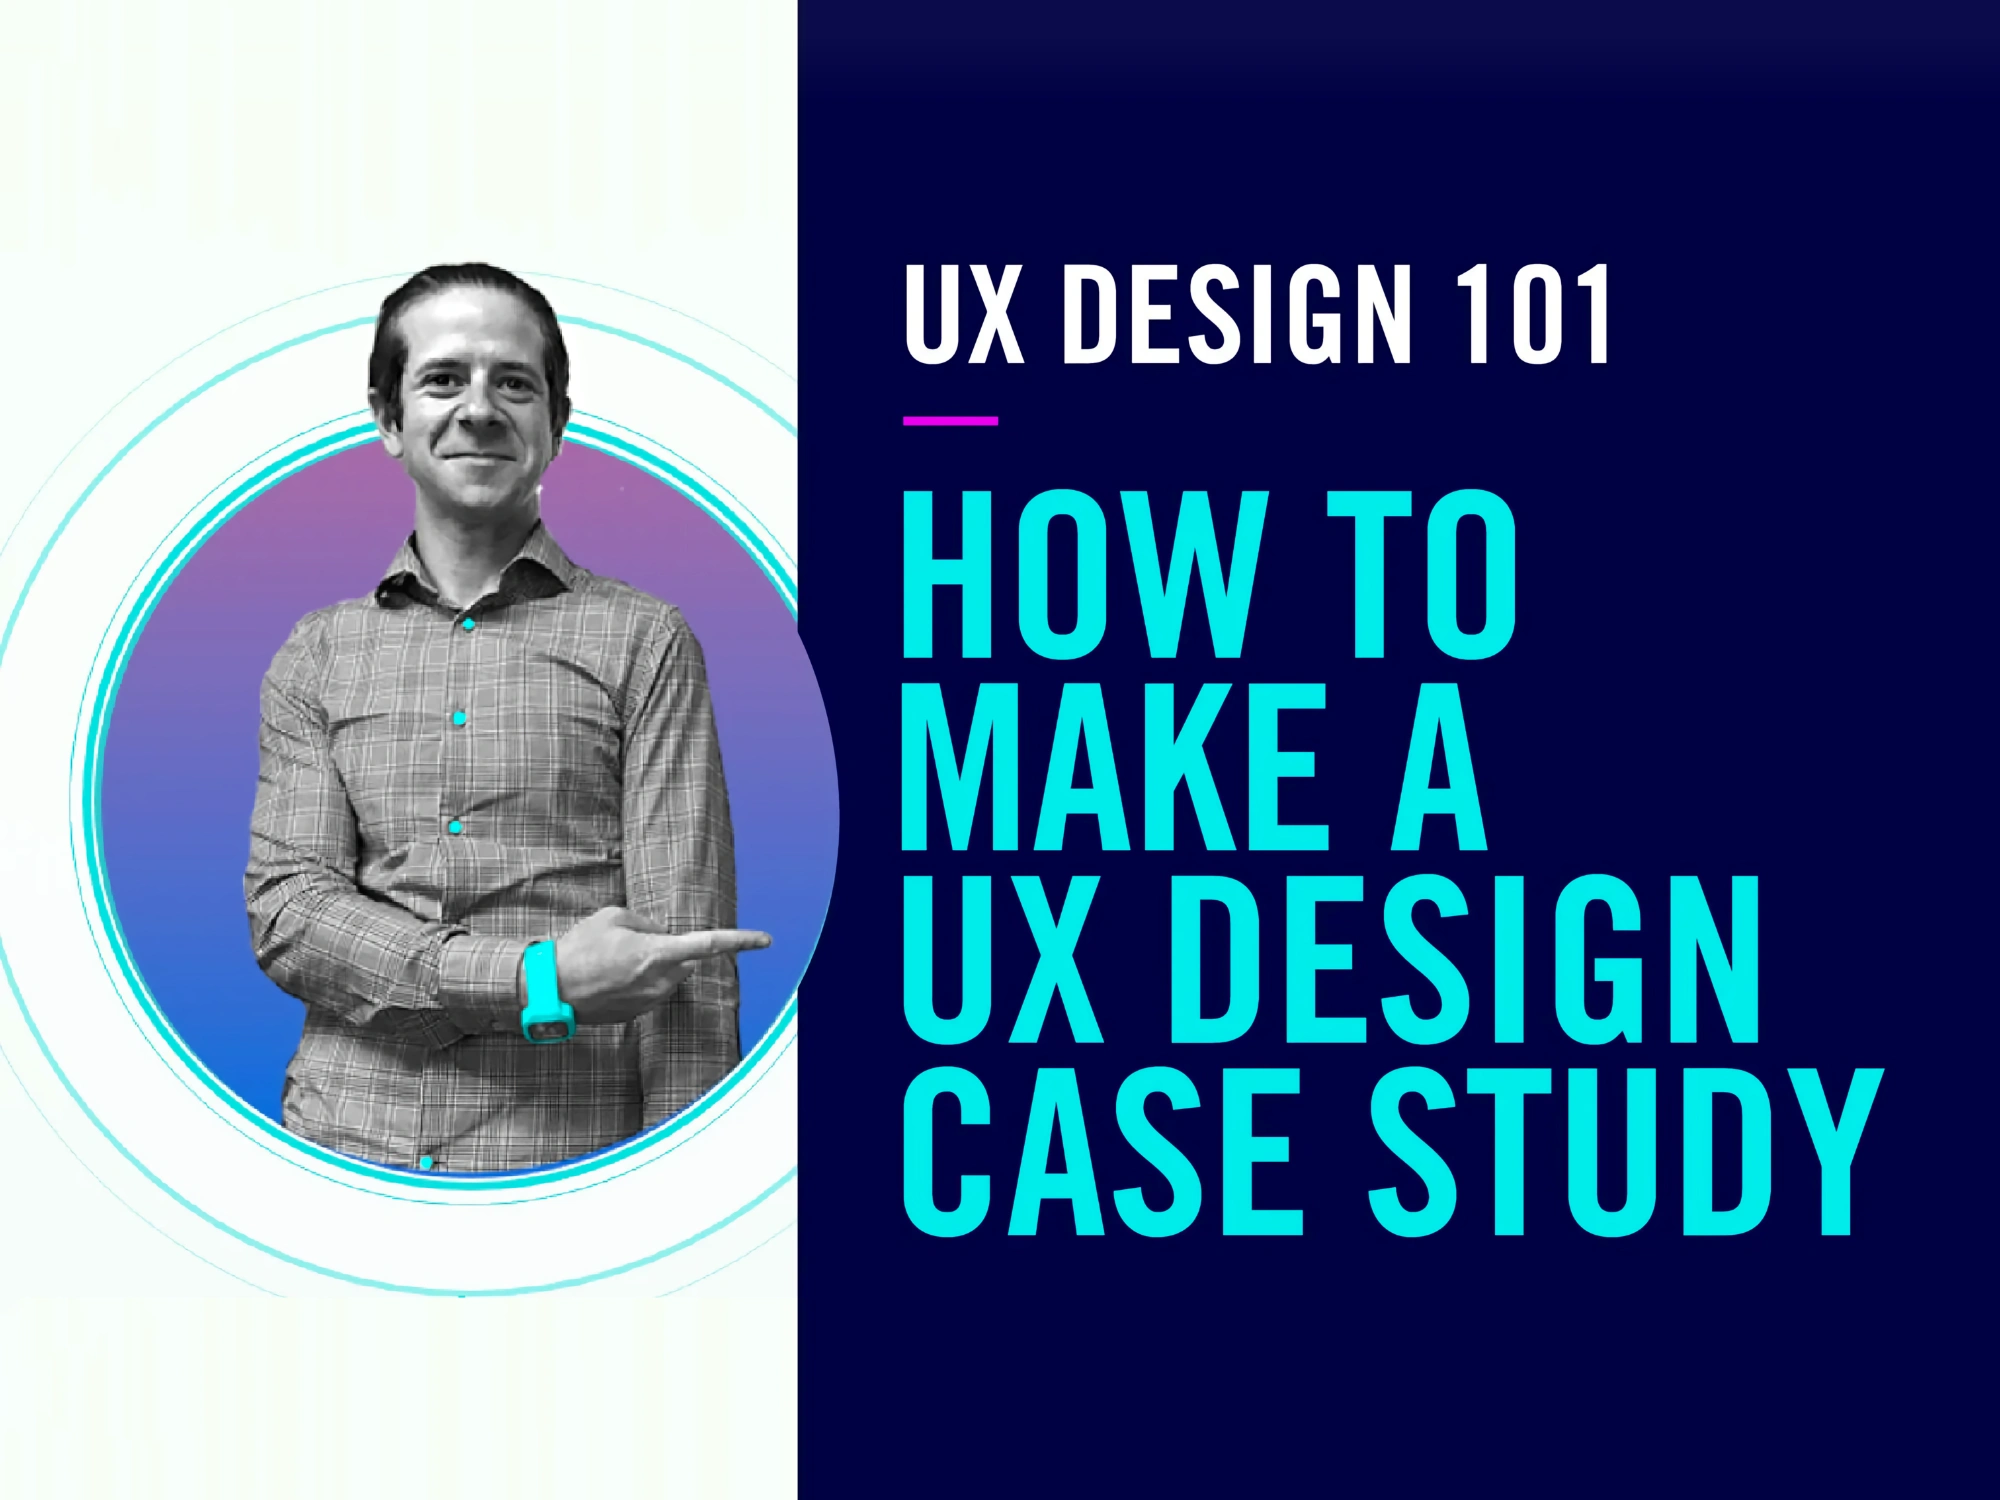 [VIP] User Experience Design college course, intro to UI & UX design taught by a University UX instructor.